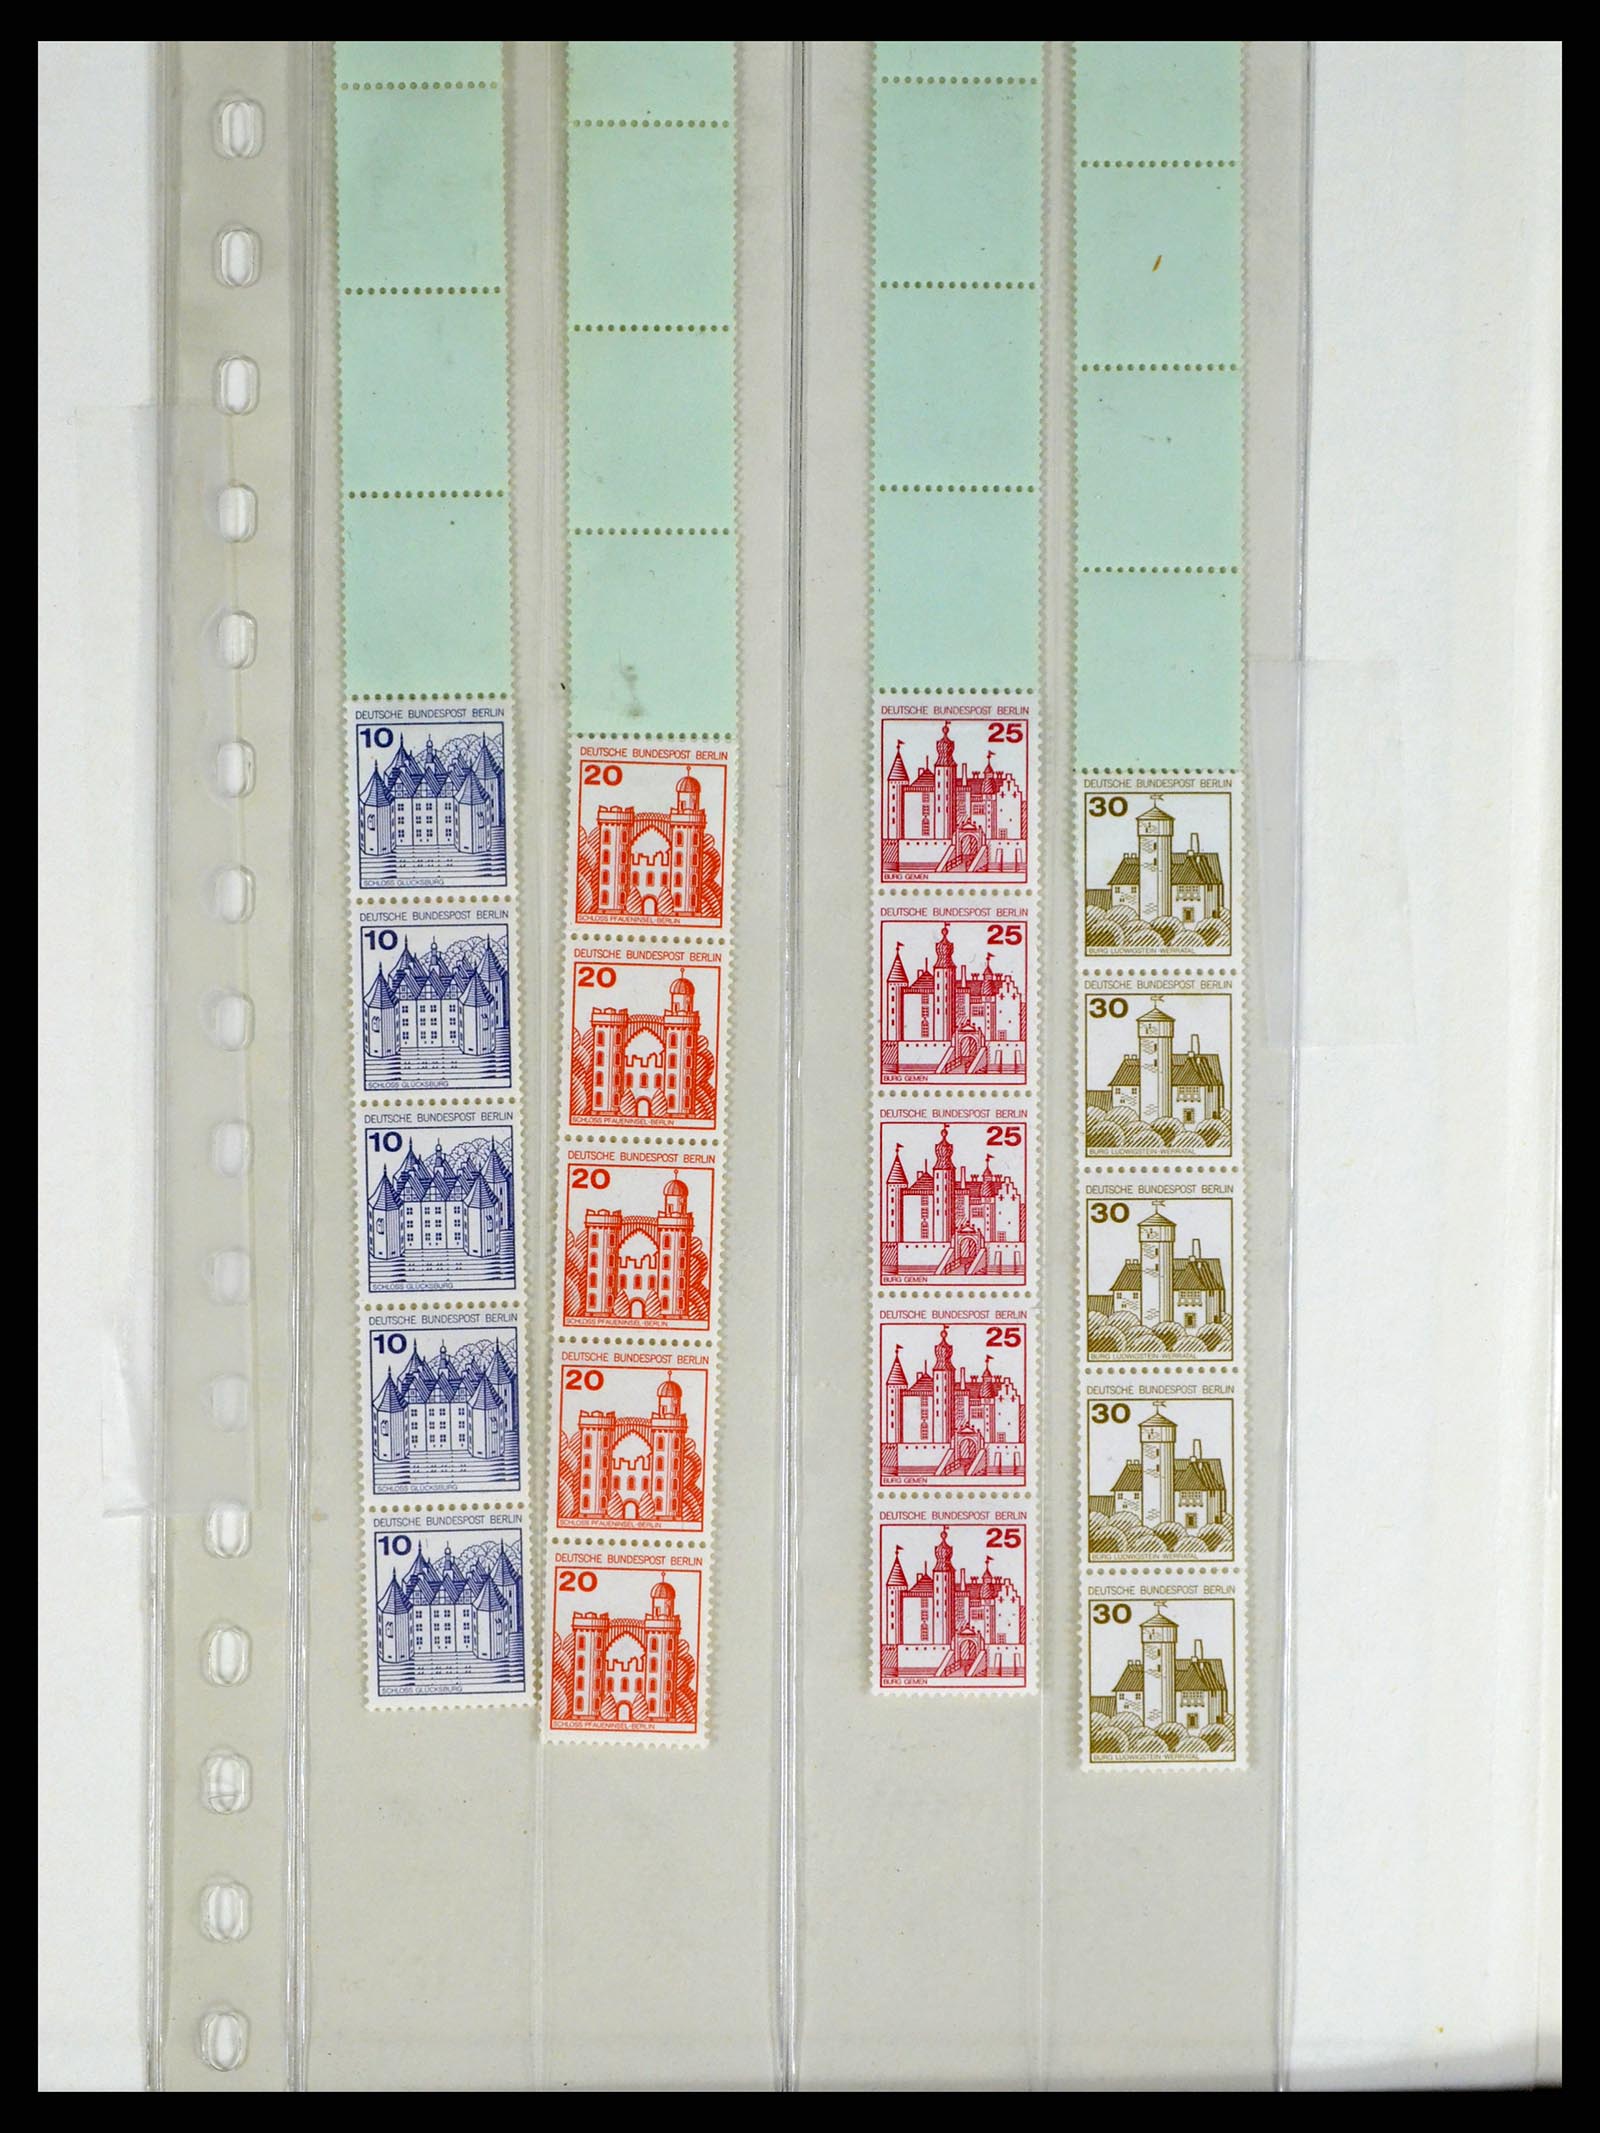 37354 041 - Stamp collection 37354 Bundespost and Berlin 1955-2000.